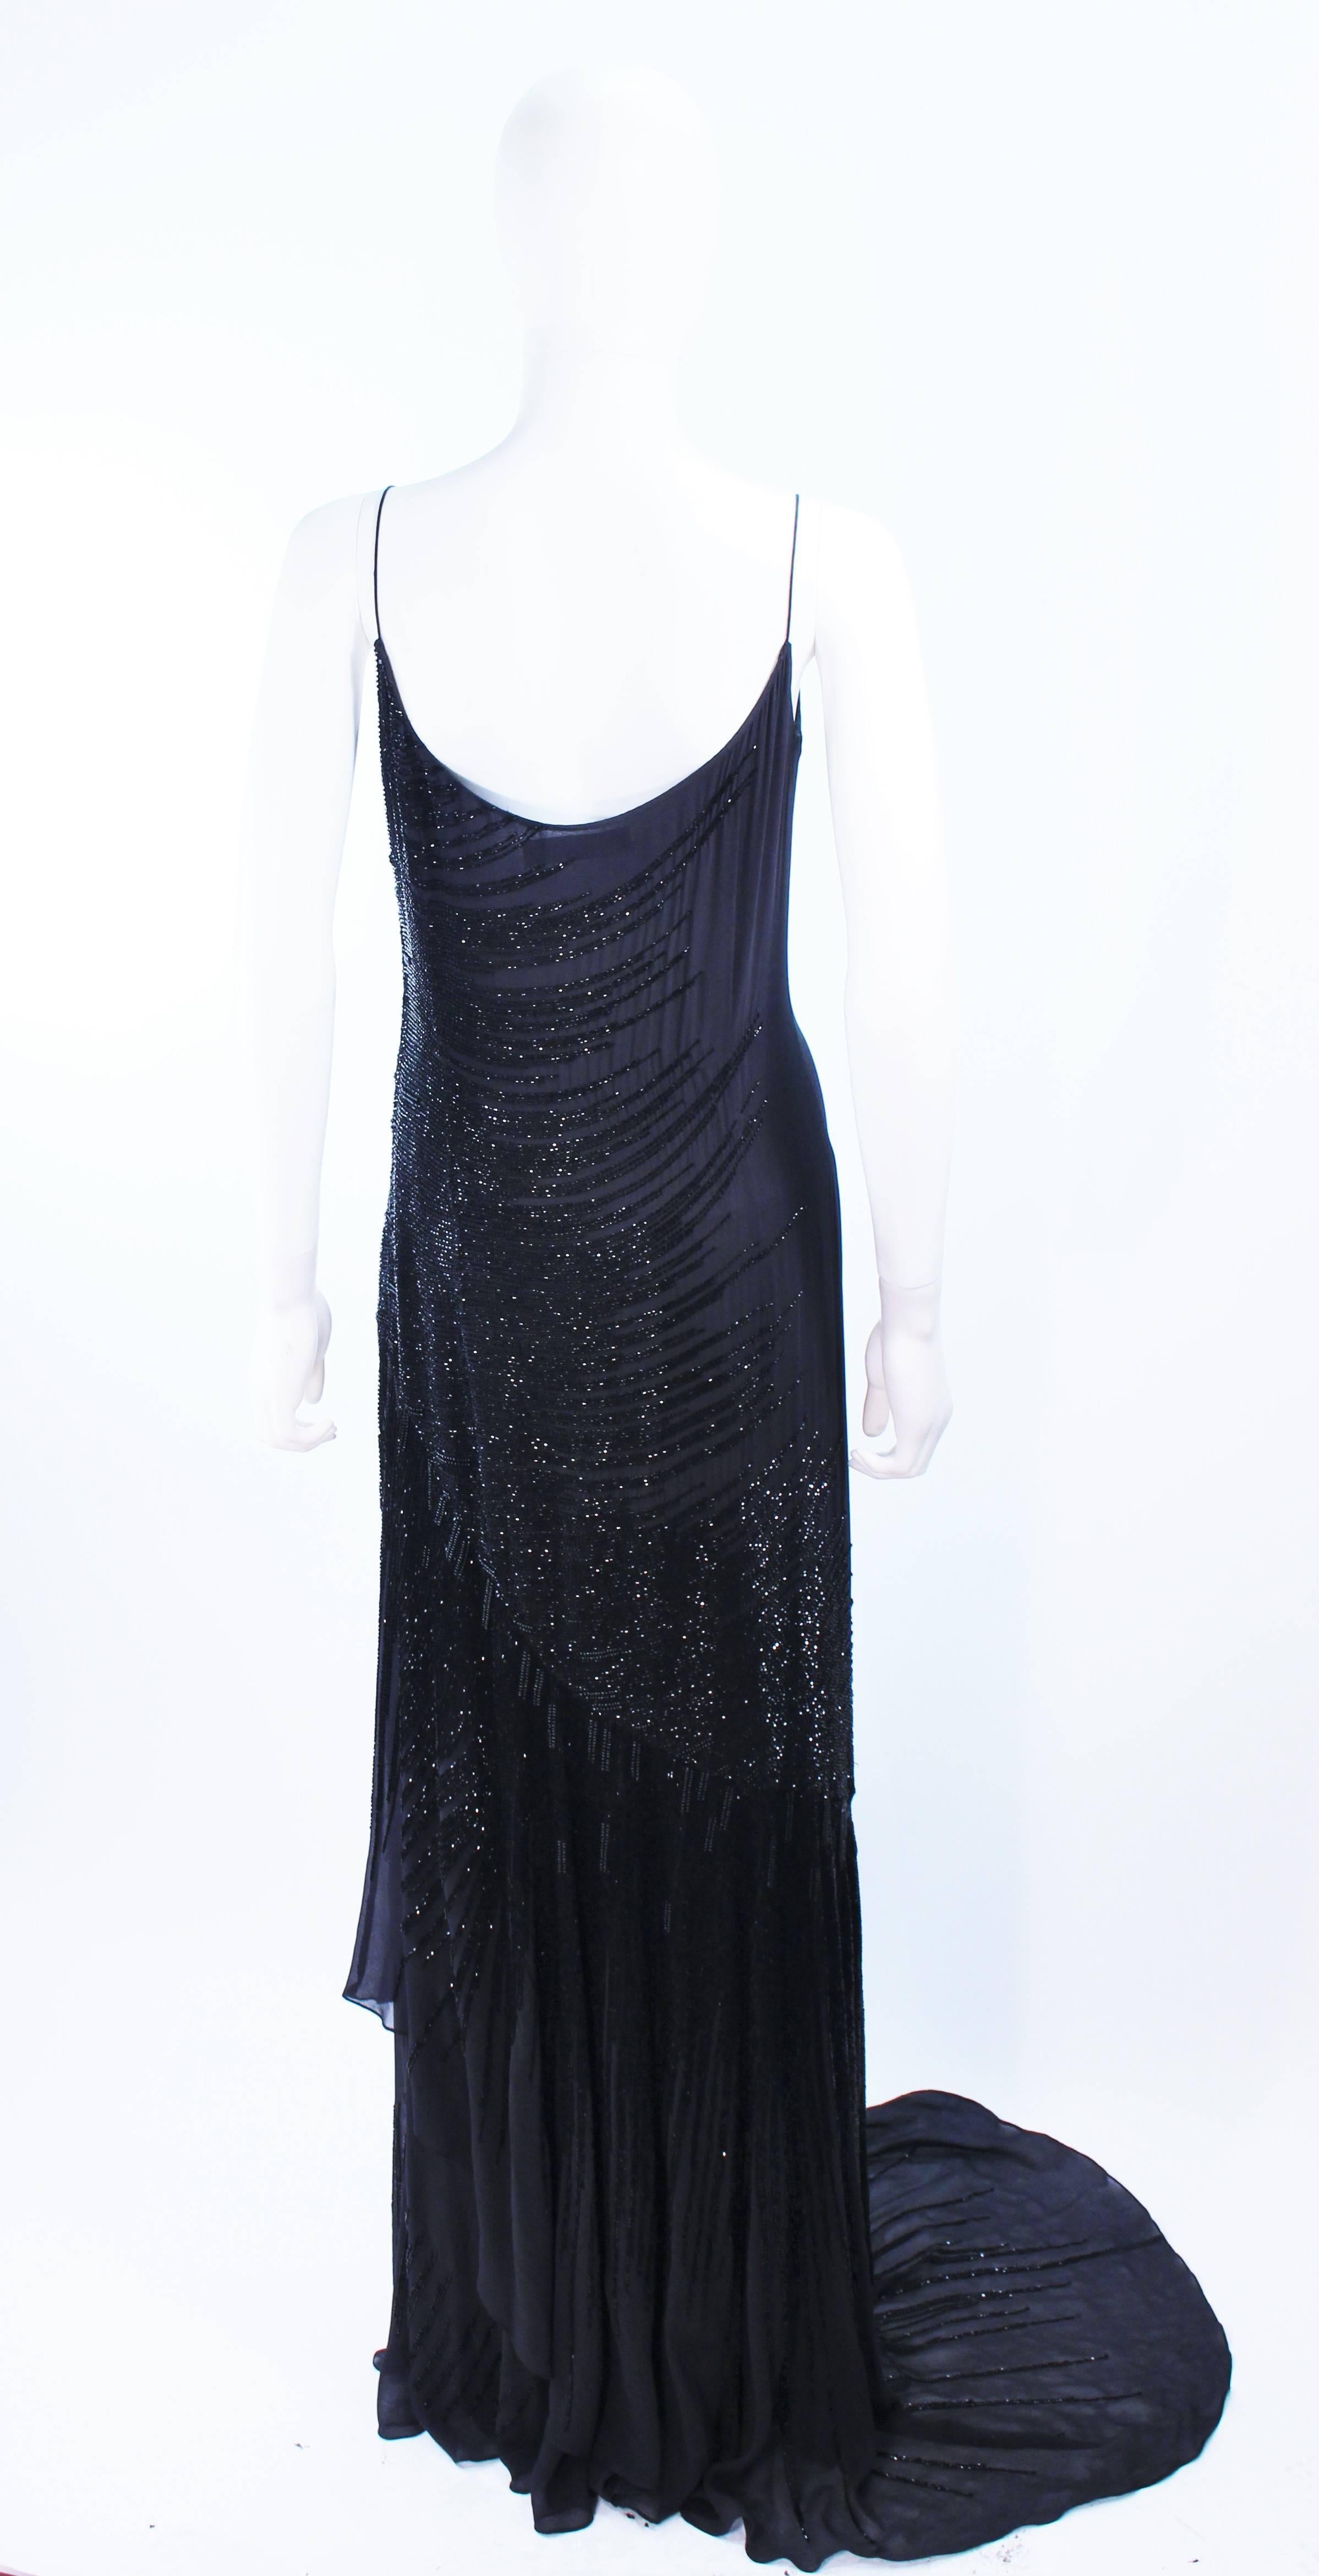 AMANDA WAKELY Black Beaded Silk Chiffon Gown Size 8 For Sale 4